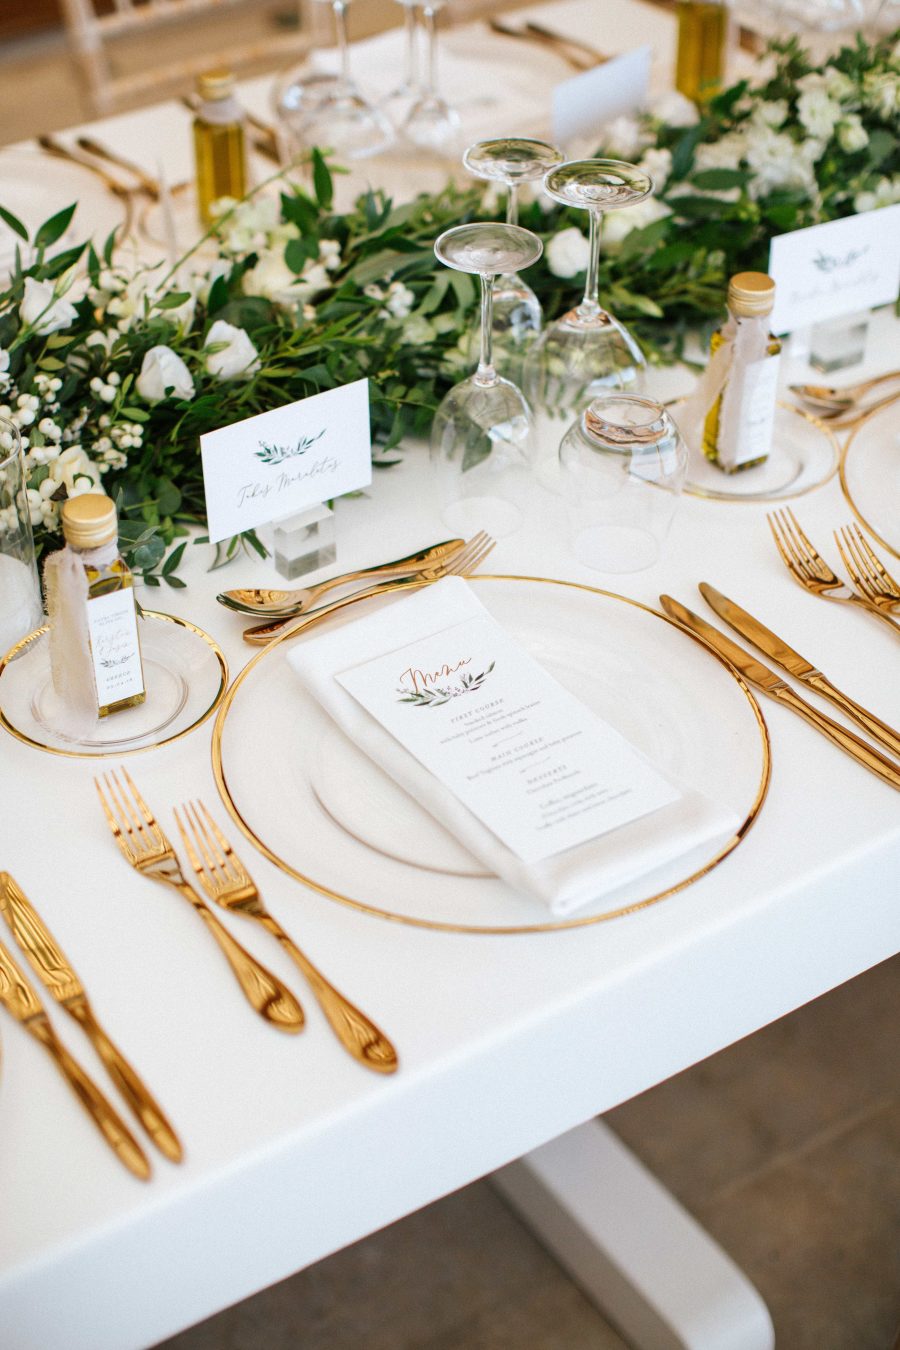 The wedding tablescape was neutral, with gold cutlery, with a greenery and white bloom table runner plus olive oil favors